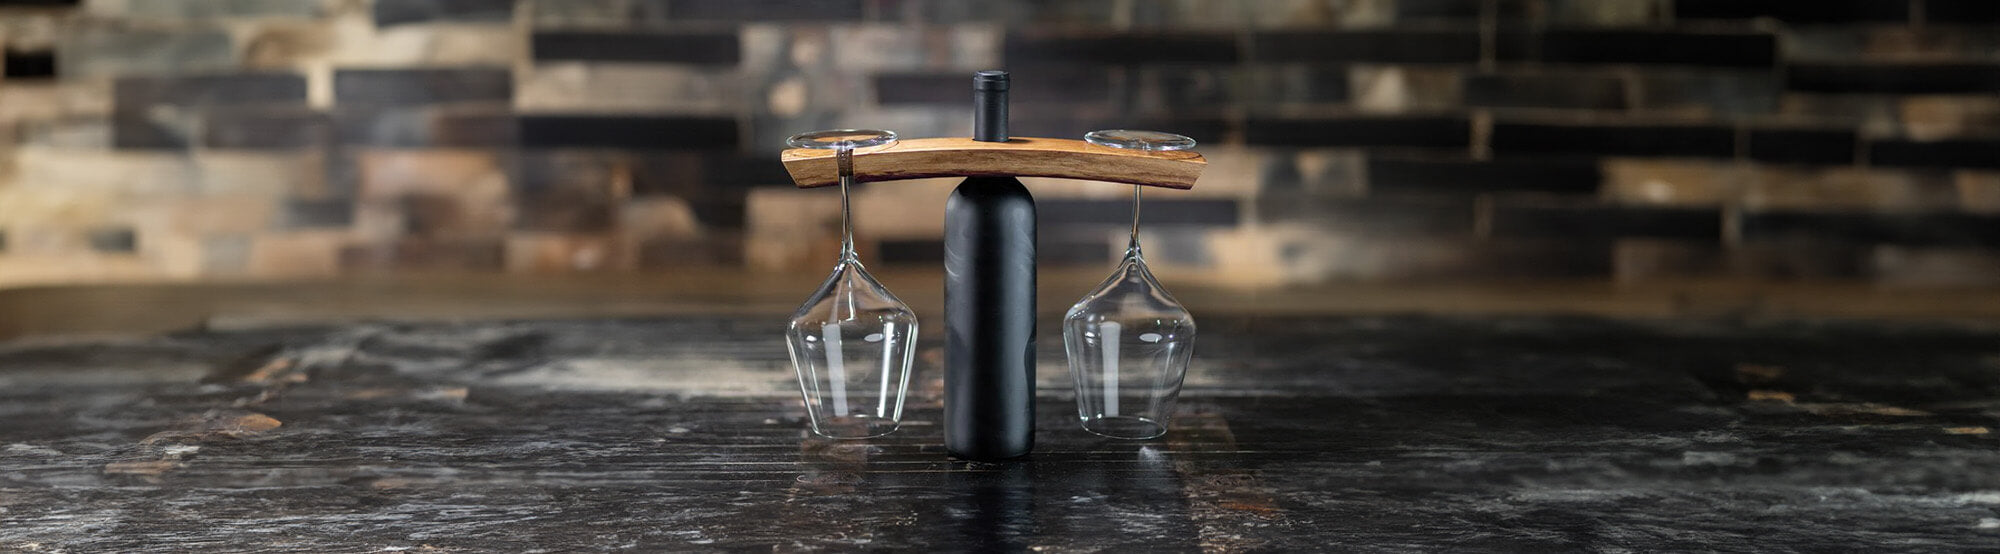 Wine caddy on a wine bottle holding two wine glasses made from wine barrel stave